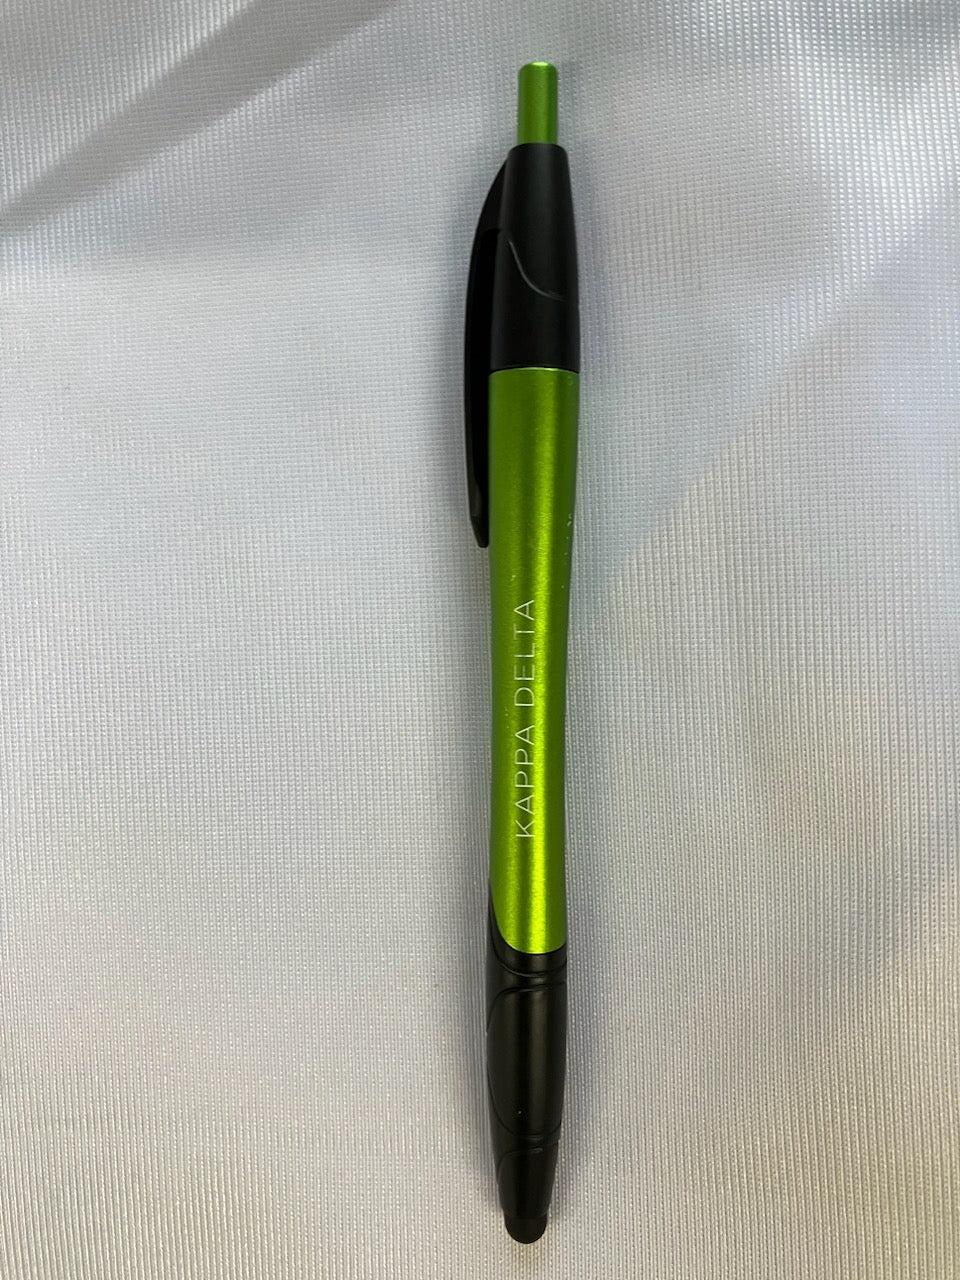 KD Lime and Black Pen